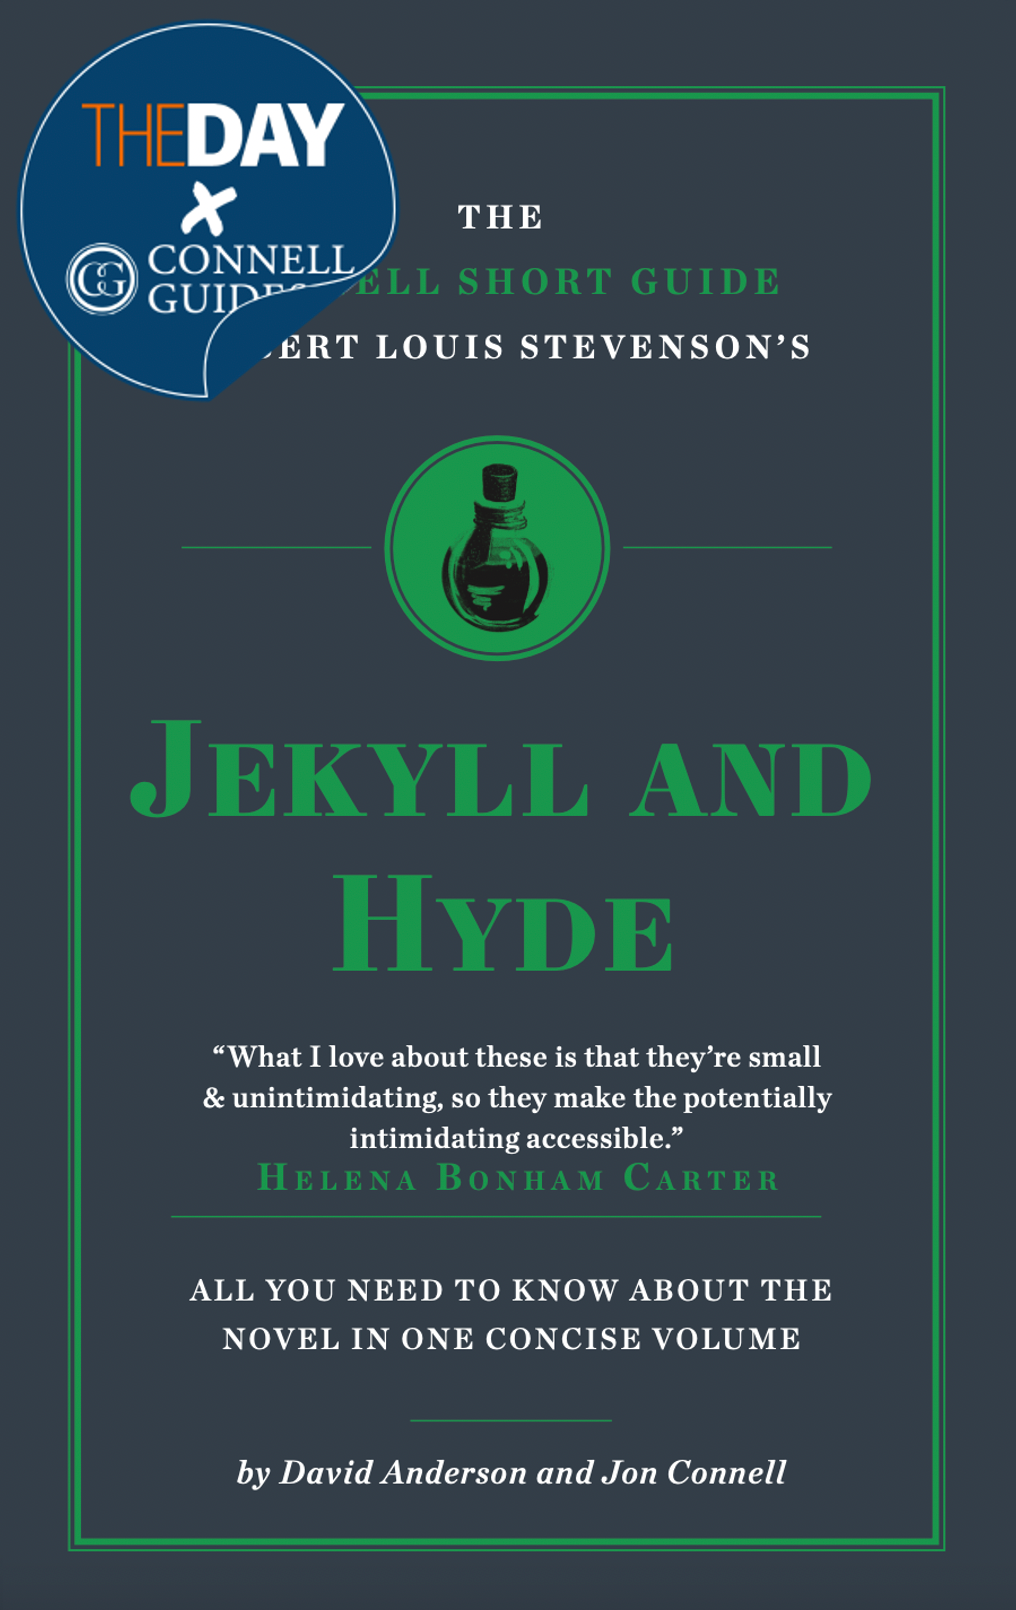 The Day x Connell Guides - The Connell Short Guide to Dr Jekyll and Mr Hyde